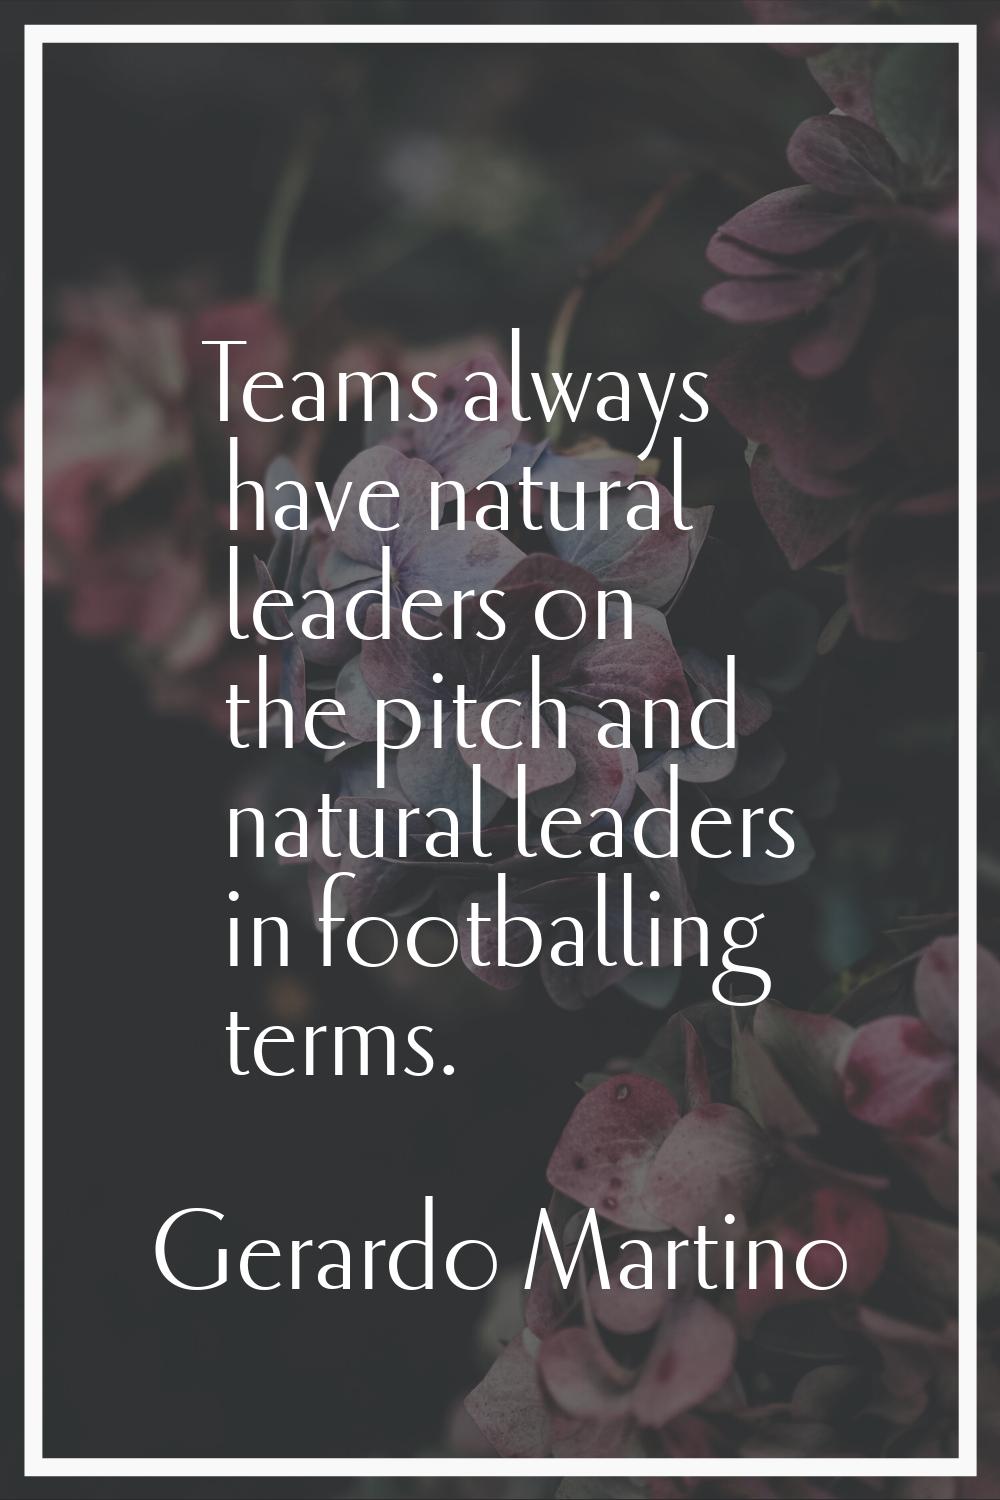 Teams always have natural leaders on the pitch and natural leaders in footballing terms.